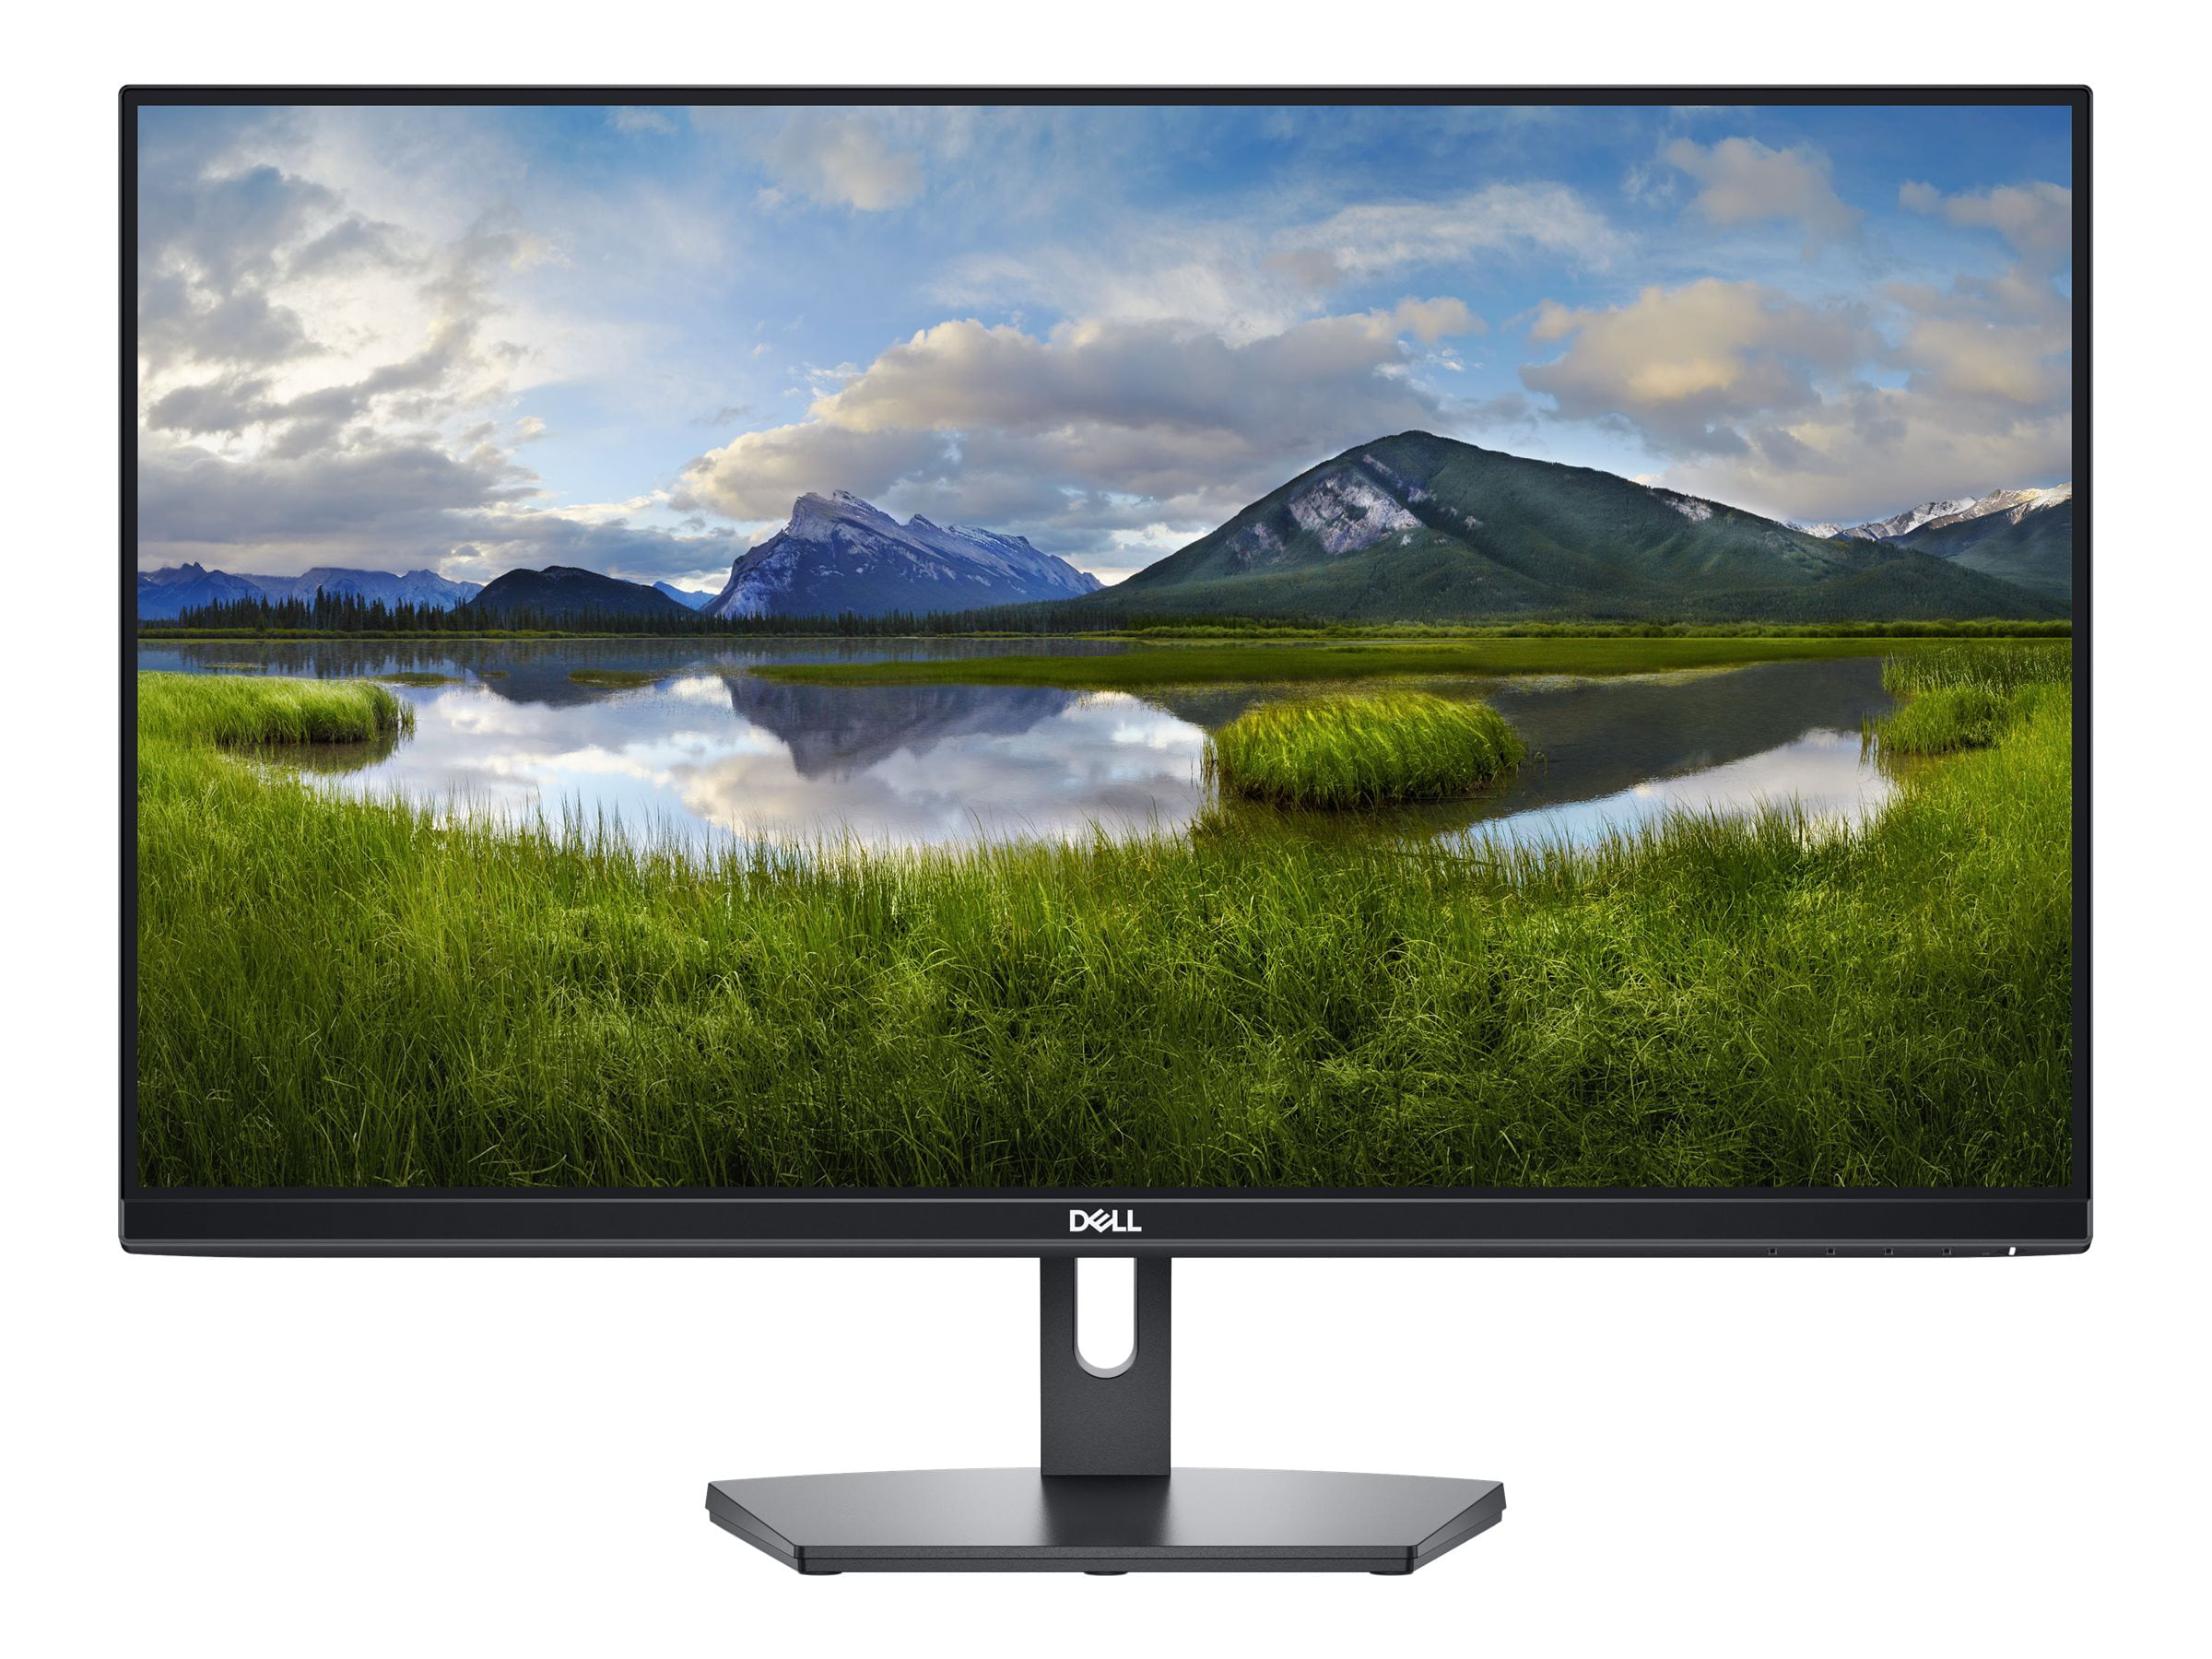 Dell SE2719HR - LED monitor - 27&quot; - 1920 x 1080 Full HD (1080p) @ 75 Hz - IPS - 300 cd/m������ - 1000:1 - HDMI, VGA - piano black - with 1 year Advanced Exchange Service and Limited Hardware Warranty